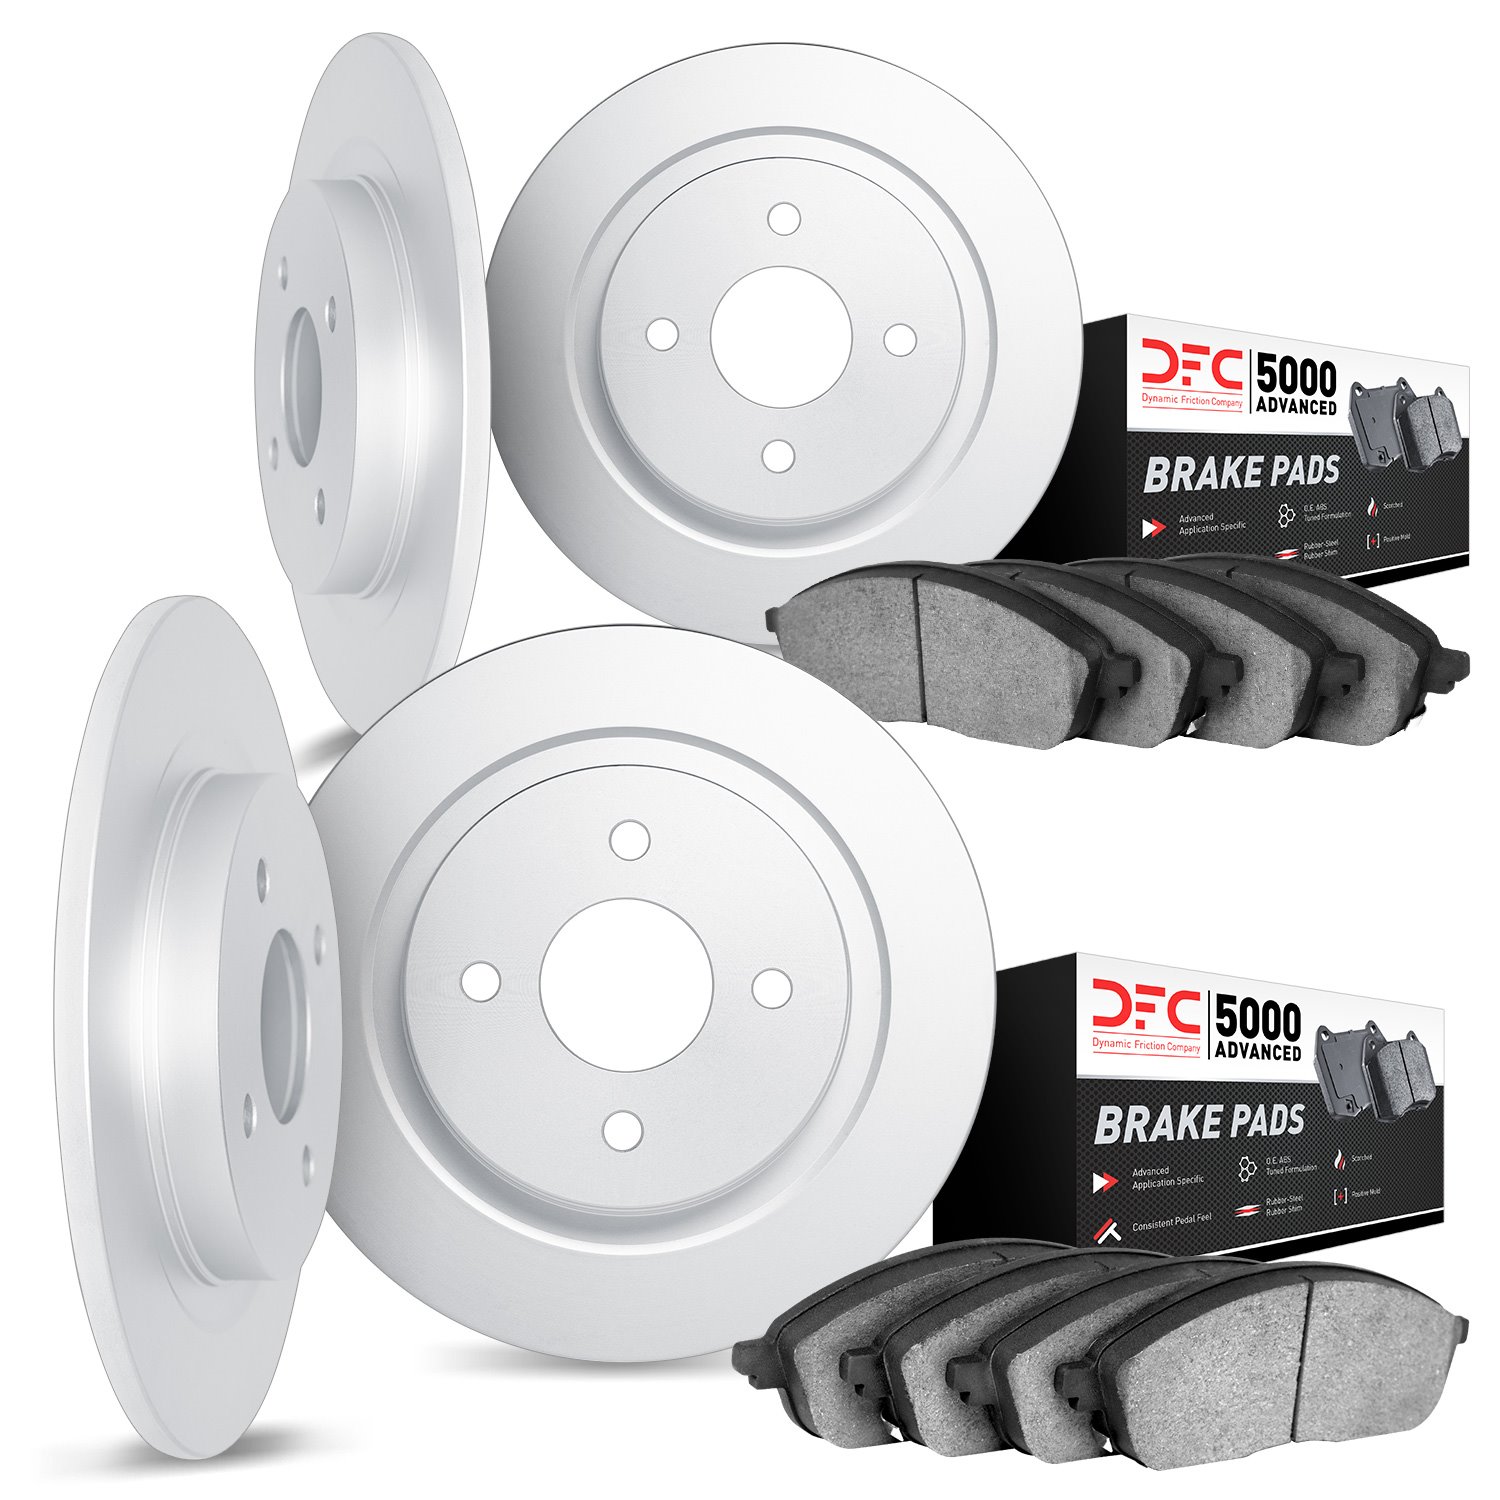 6504-65012 Brake Rotors w/5000 Advanced Brake Pads Kit, 1981-1987 GM, Position: Front and Rear